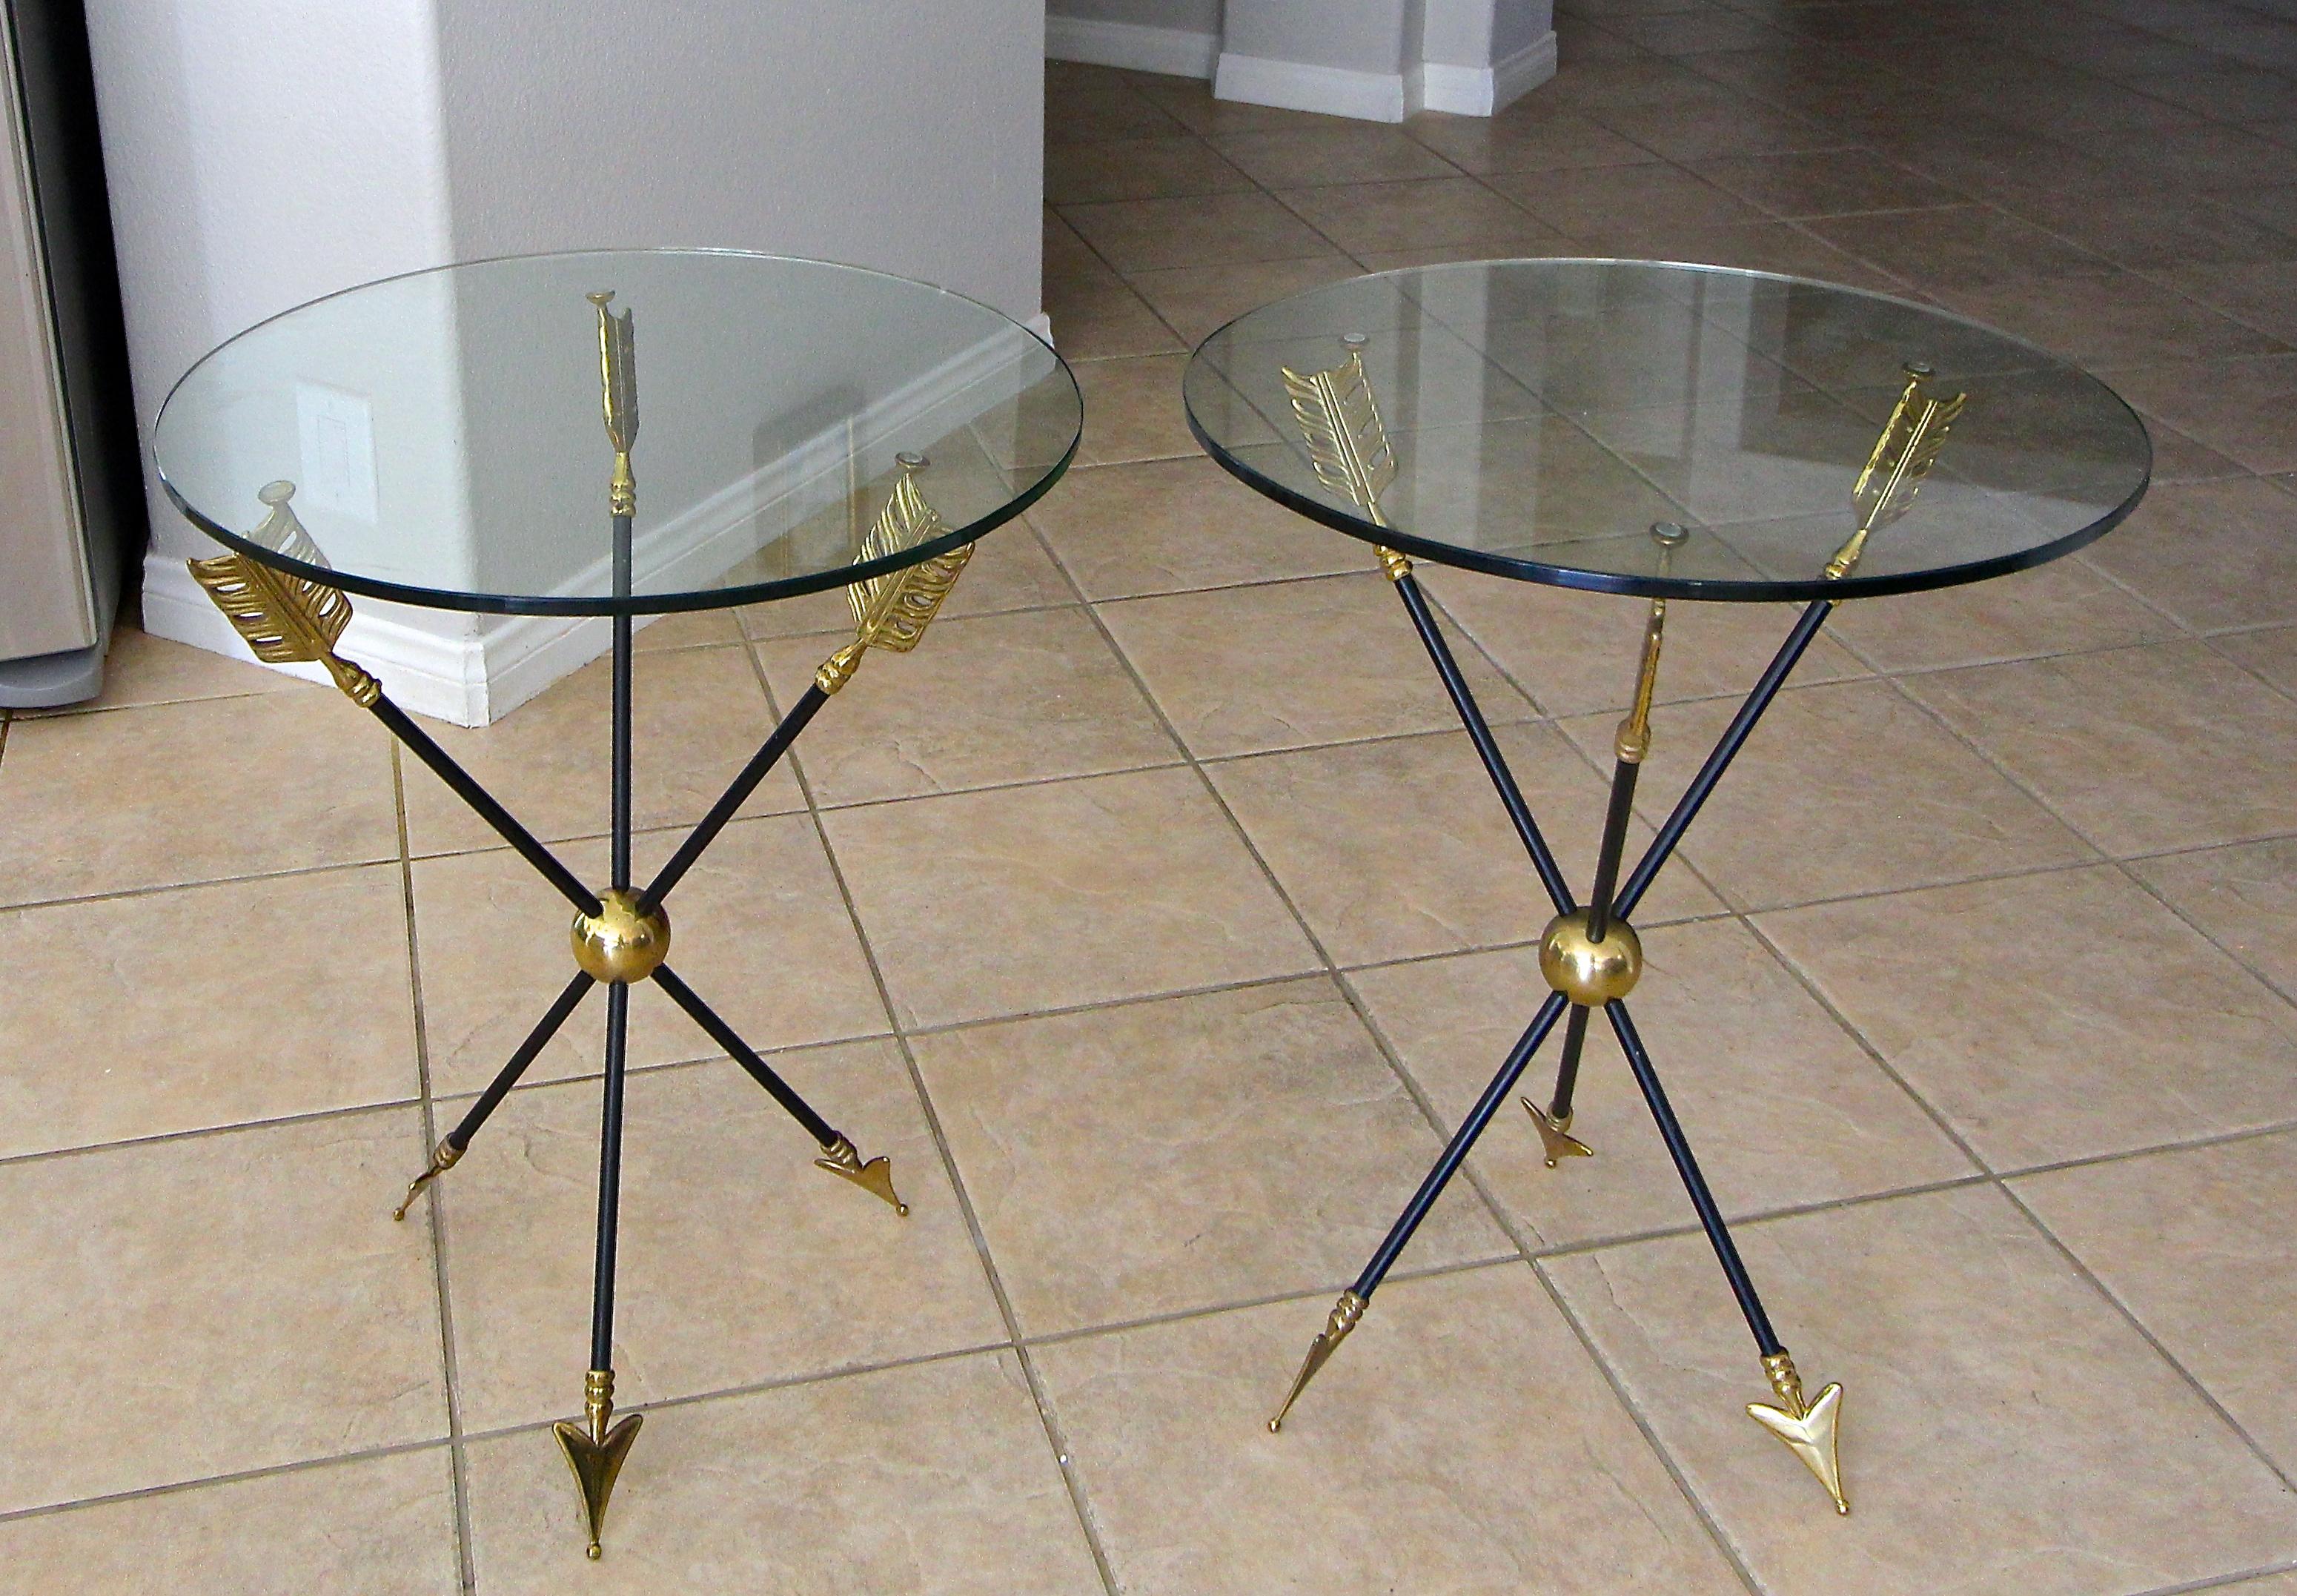 Pair of French Directoire style arrow side or end tables with glass tops, attributed to Maison Jansen. Detailing of the arrow motif includes solid cast brass tip and feathers connected by black iron shaft. Nice original patina to brass.